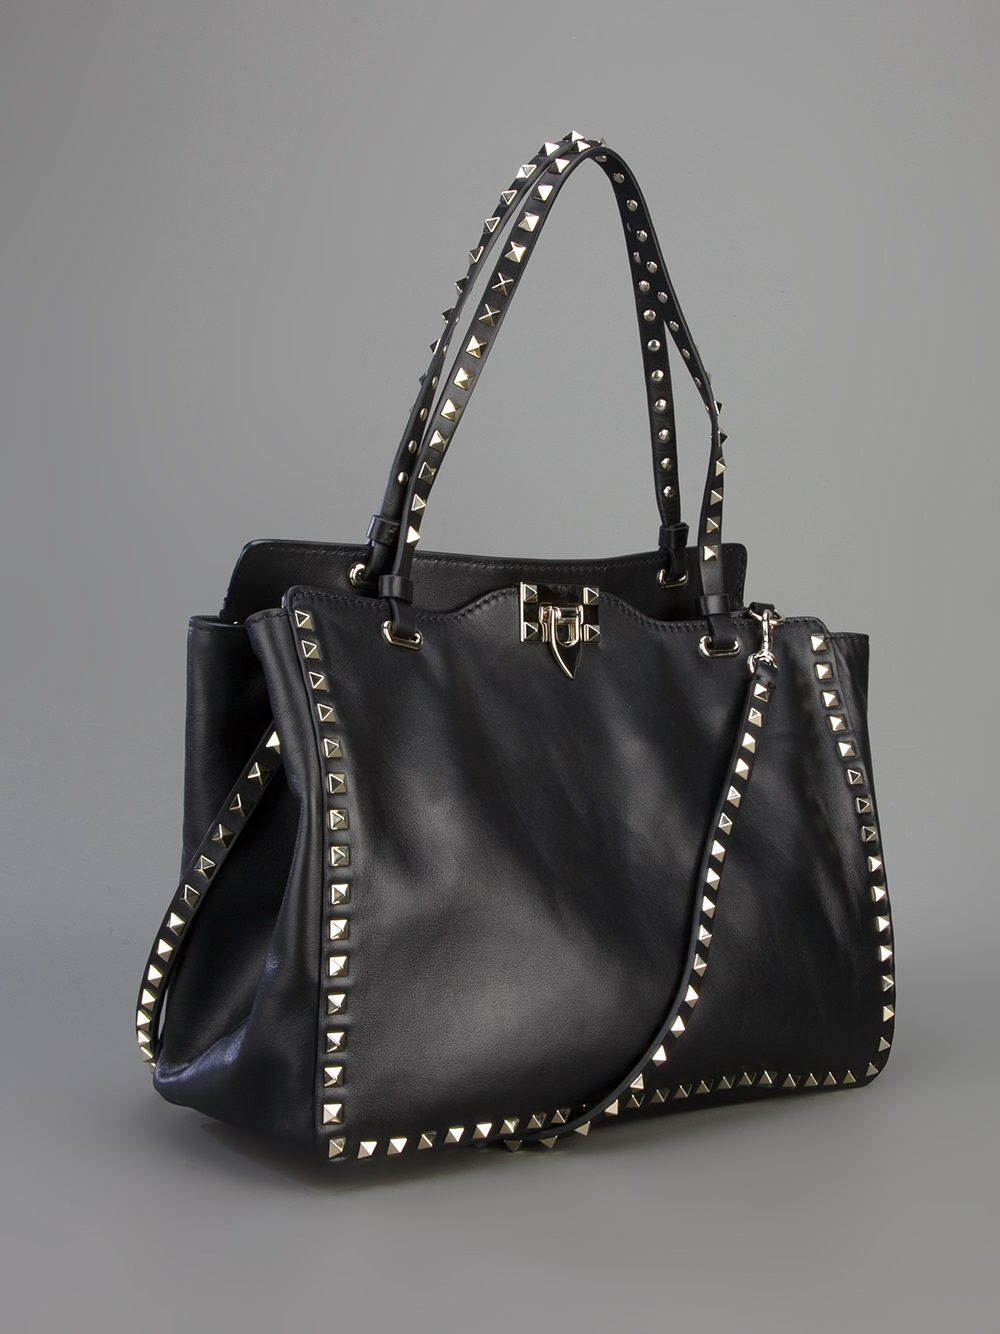 Lyst - Valentino Studded Leather Tote in Black